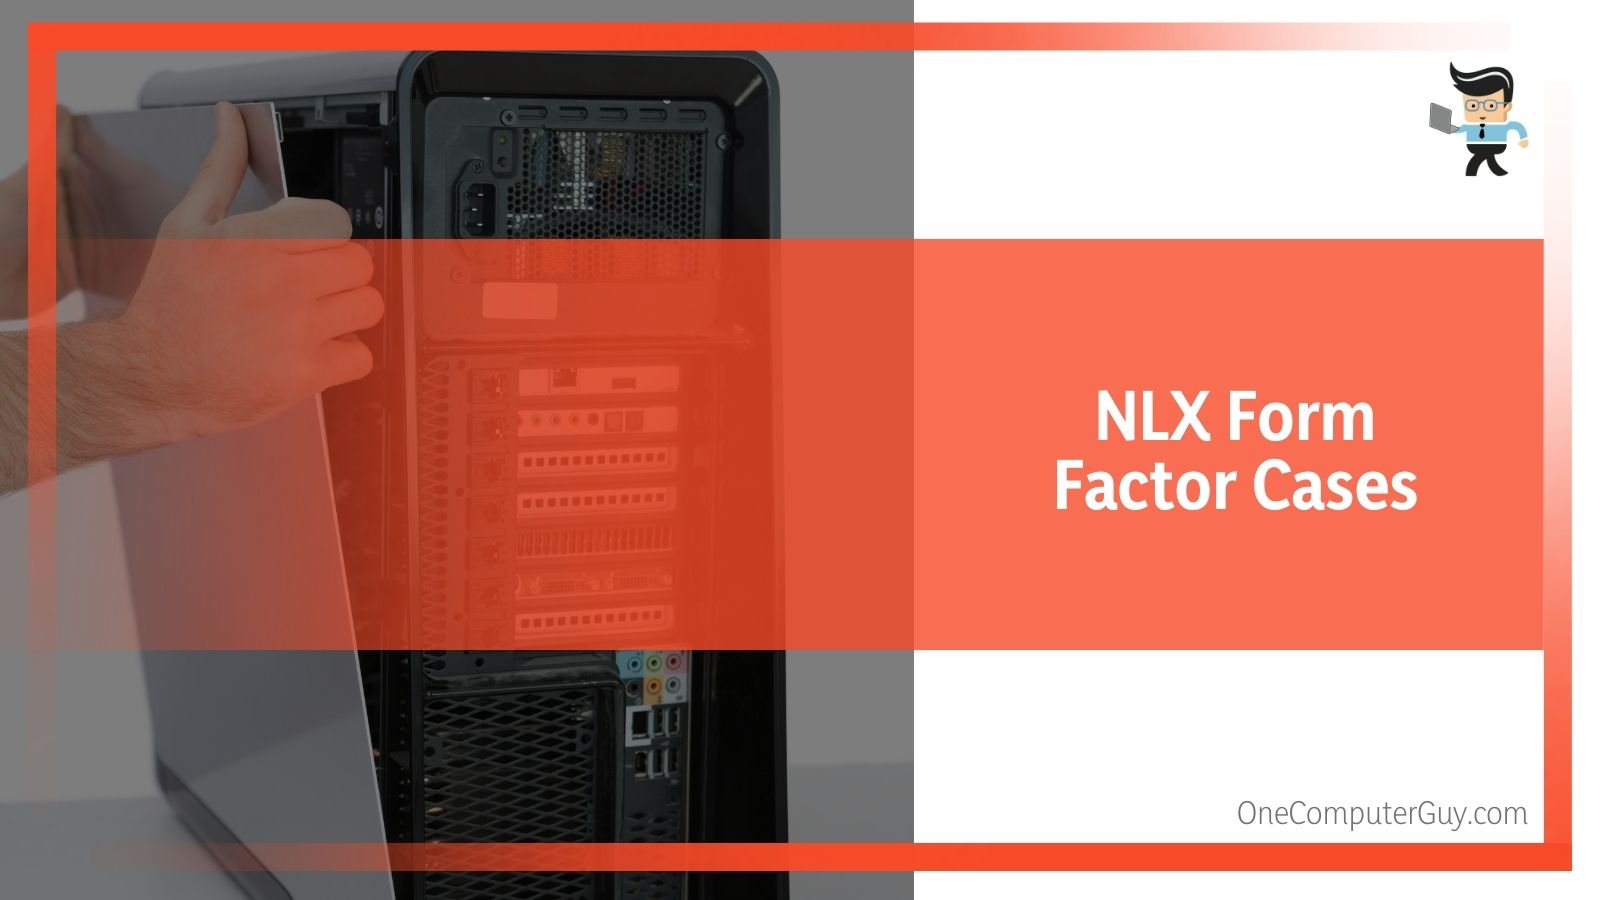 NLX Form Factor Cases